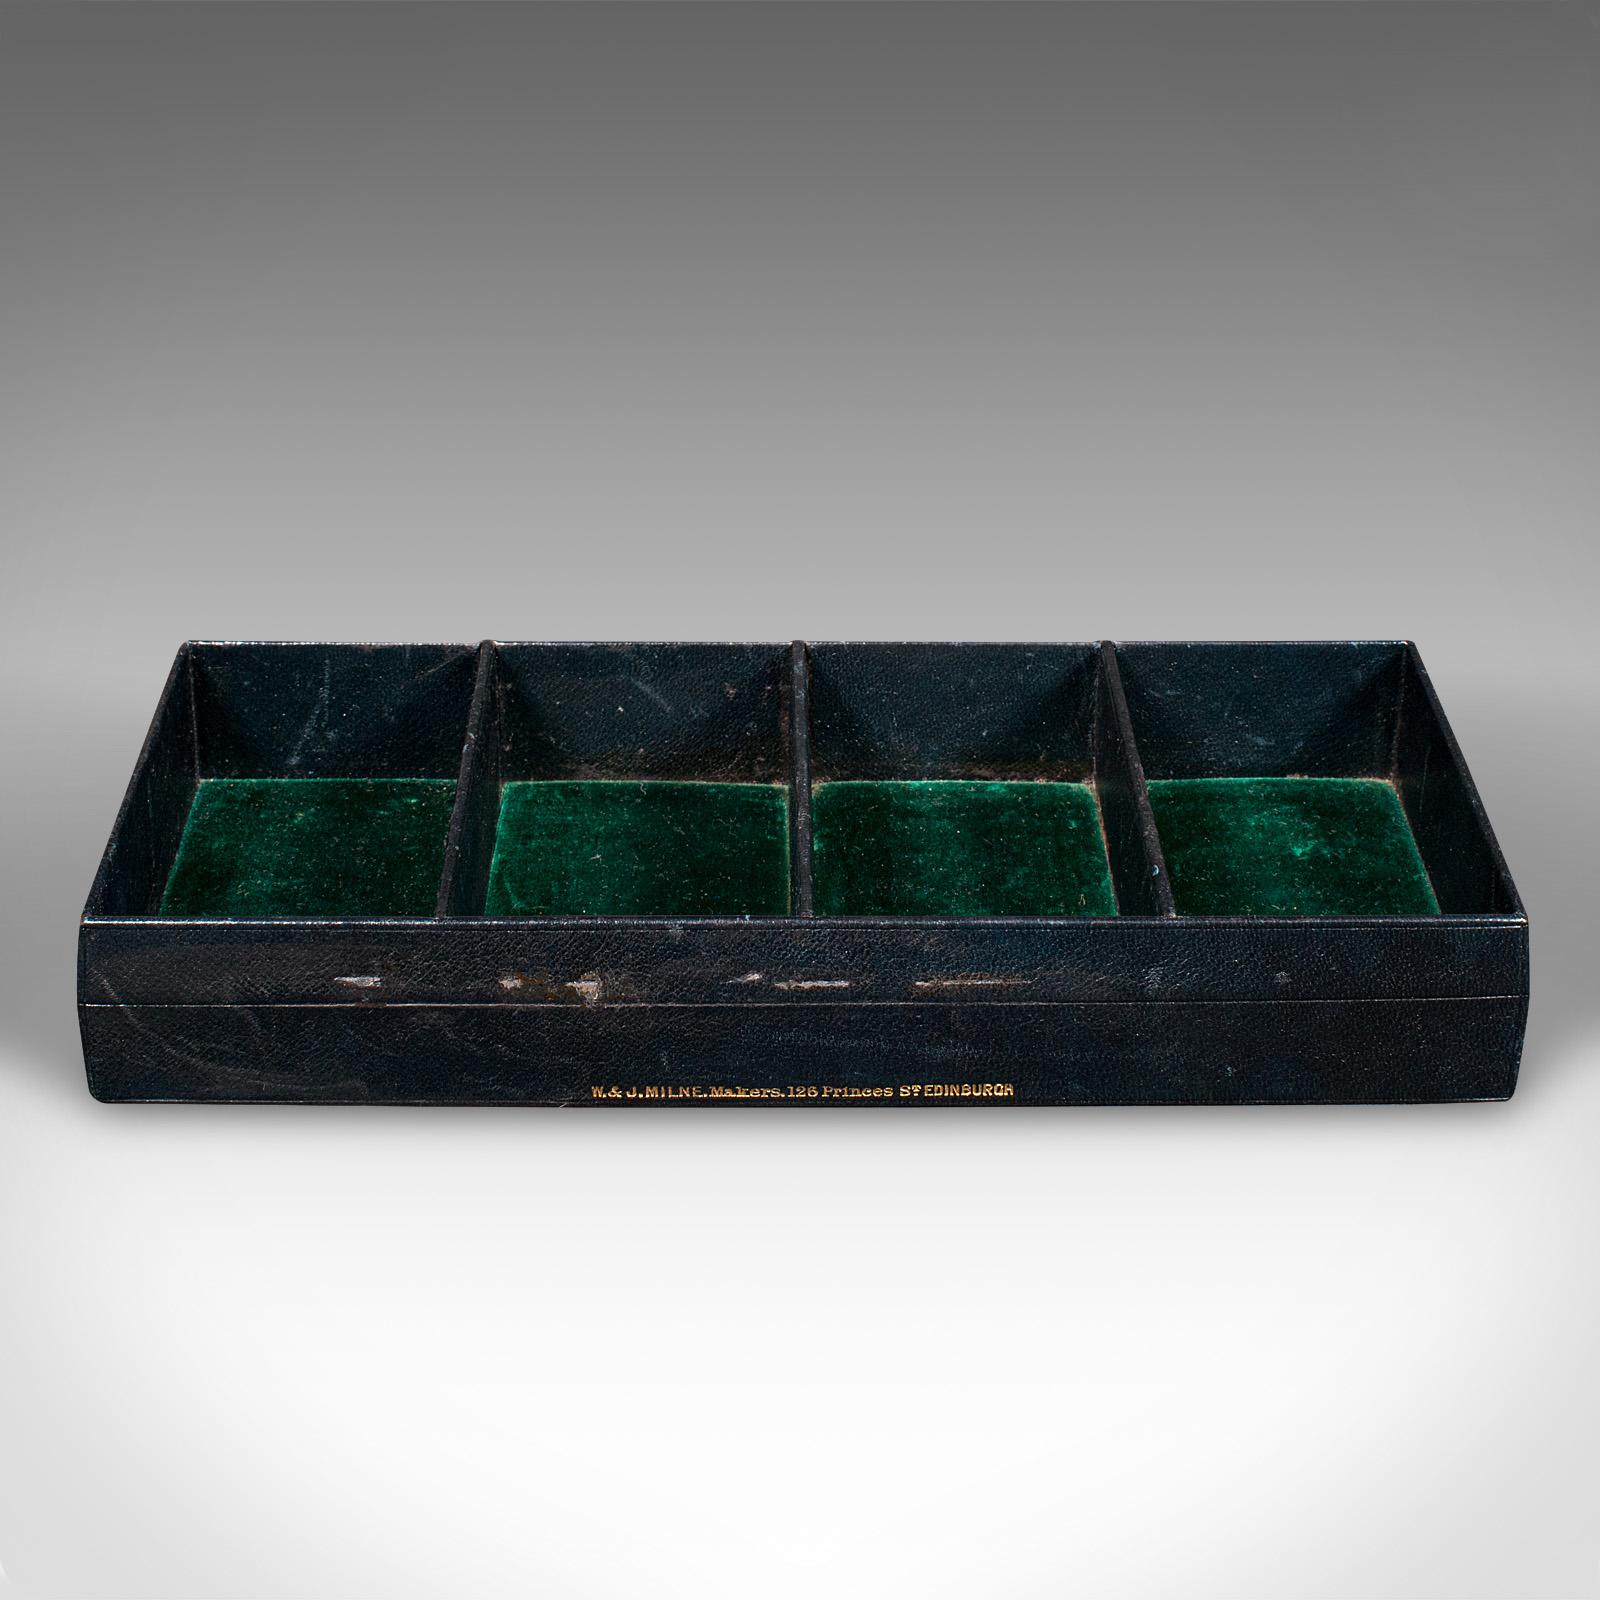 This is a small antique desk tray. A Scottish, leather compact desktop tidy by W & J Milne of Edinburgh, dating to the late Victorian period, circa 1900.

Of appealing quality with fine colour and useful compartments
Displaying a desirable aged